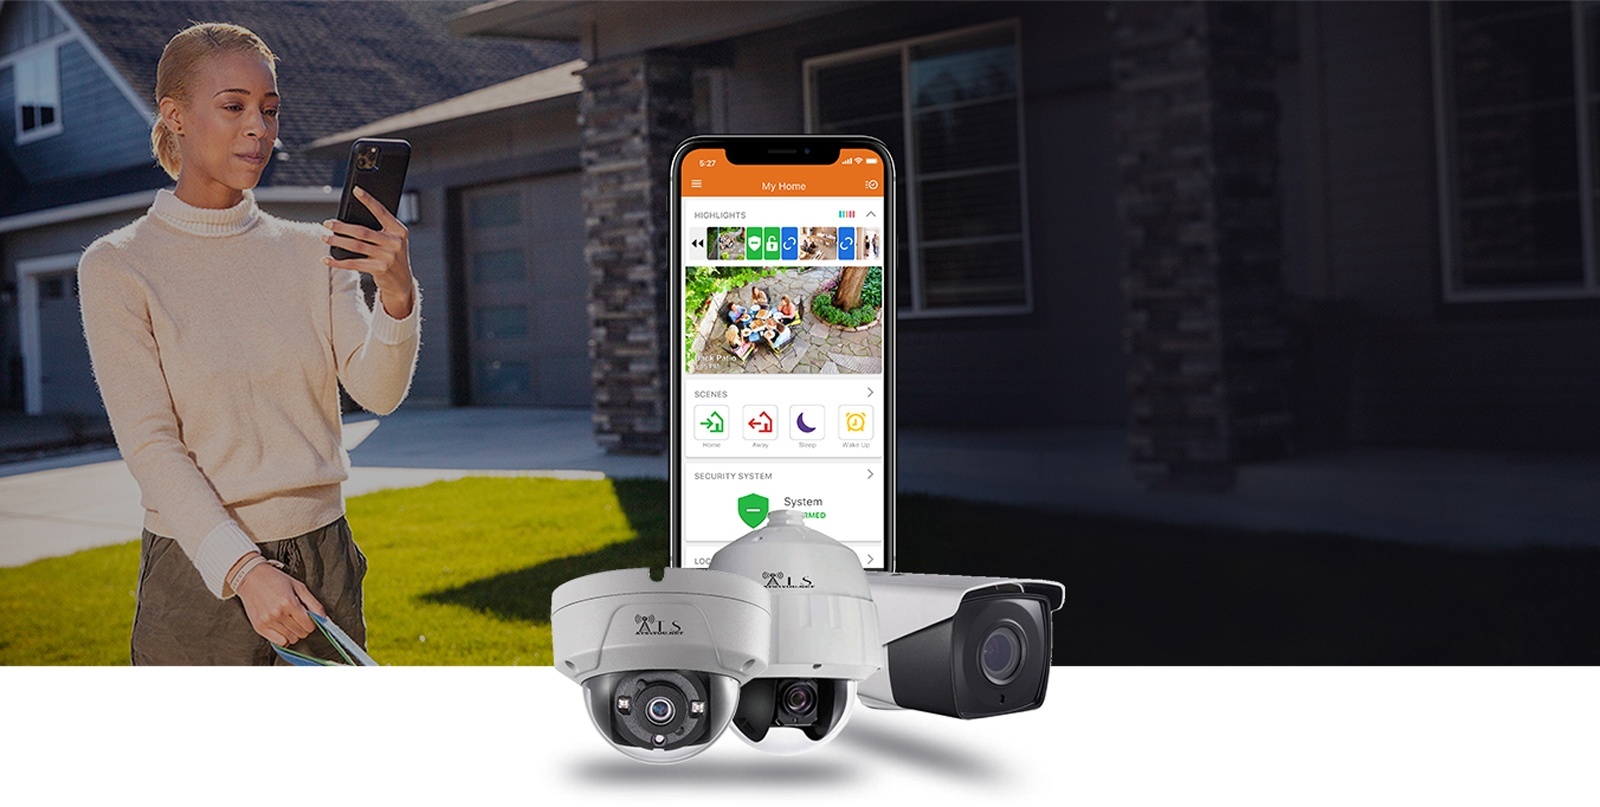 Our Security Systems can help you to protect your home and business in Port St. Lucie from theft and damage